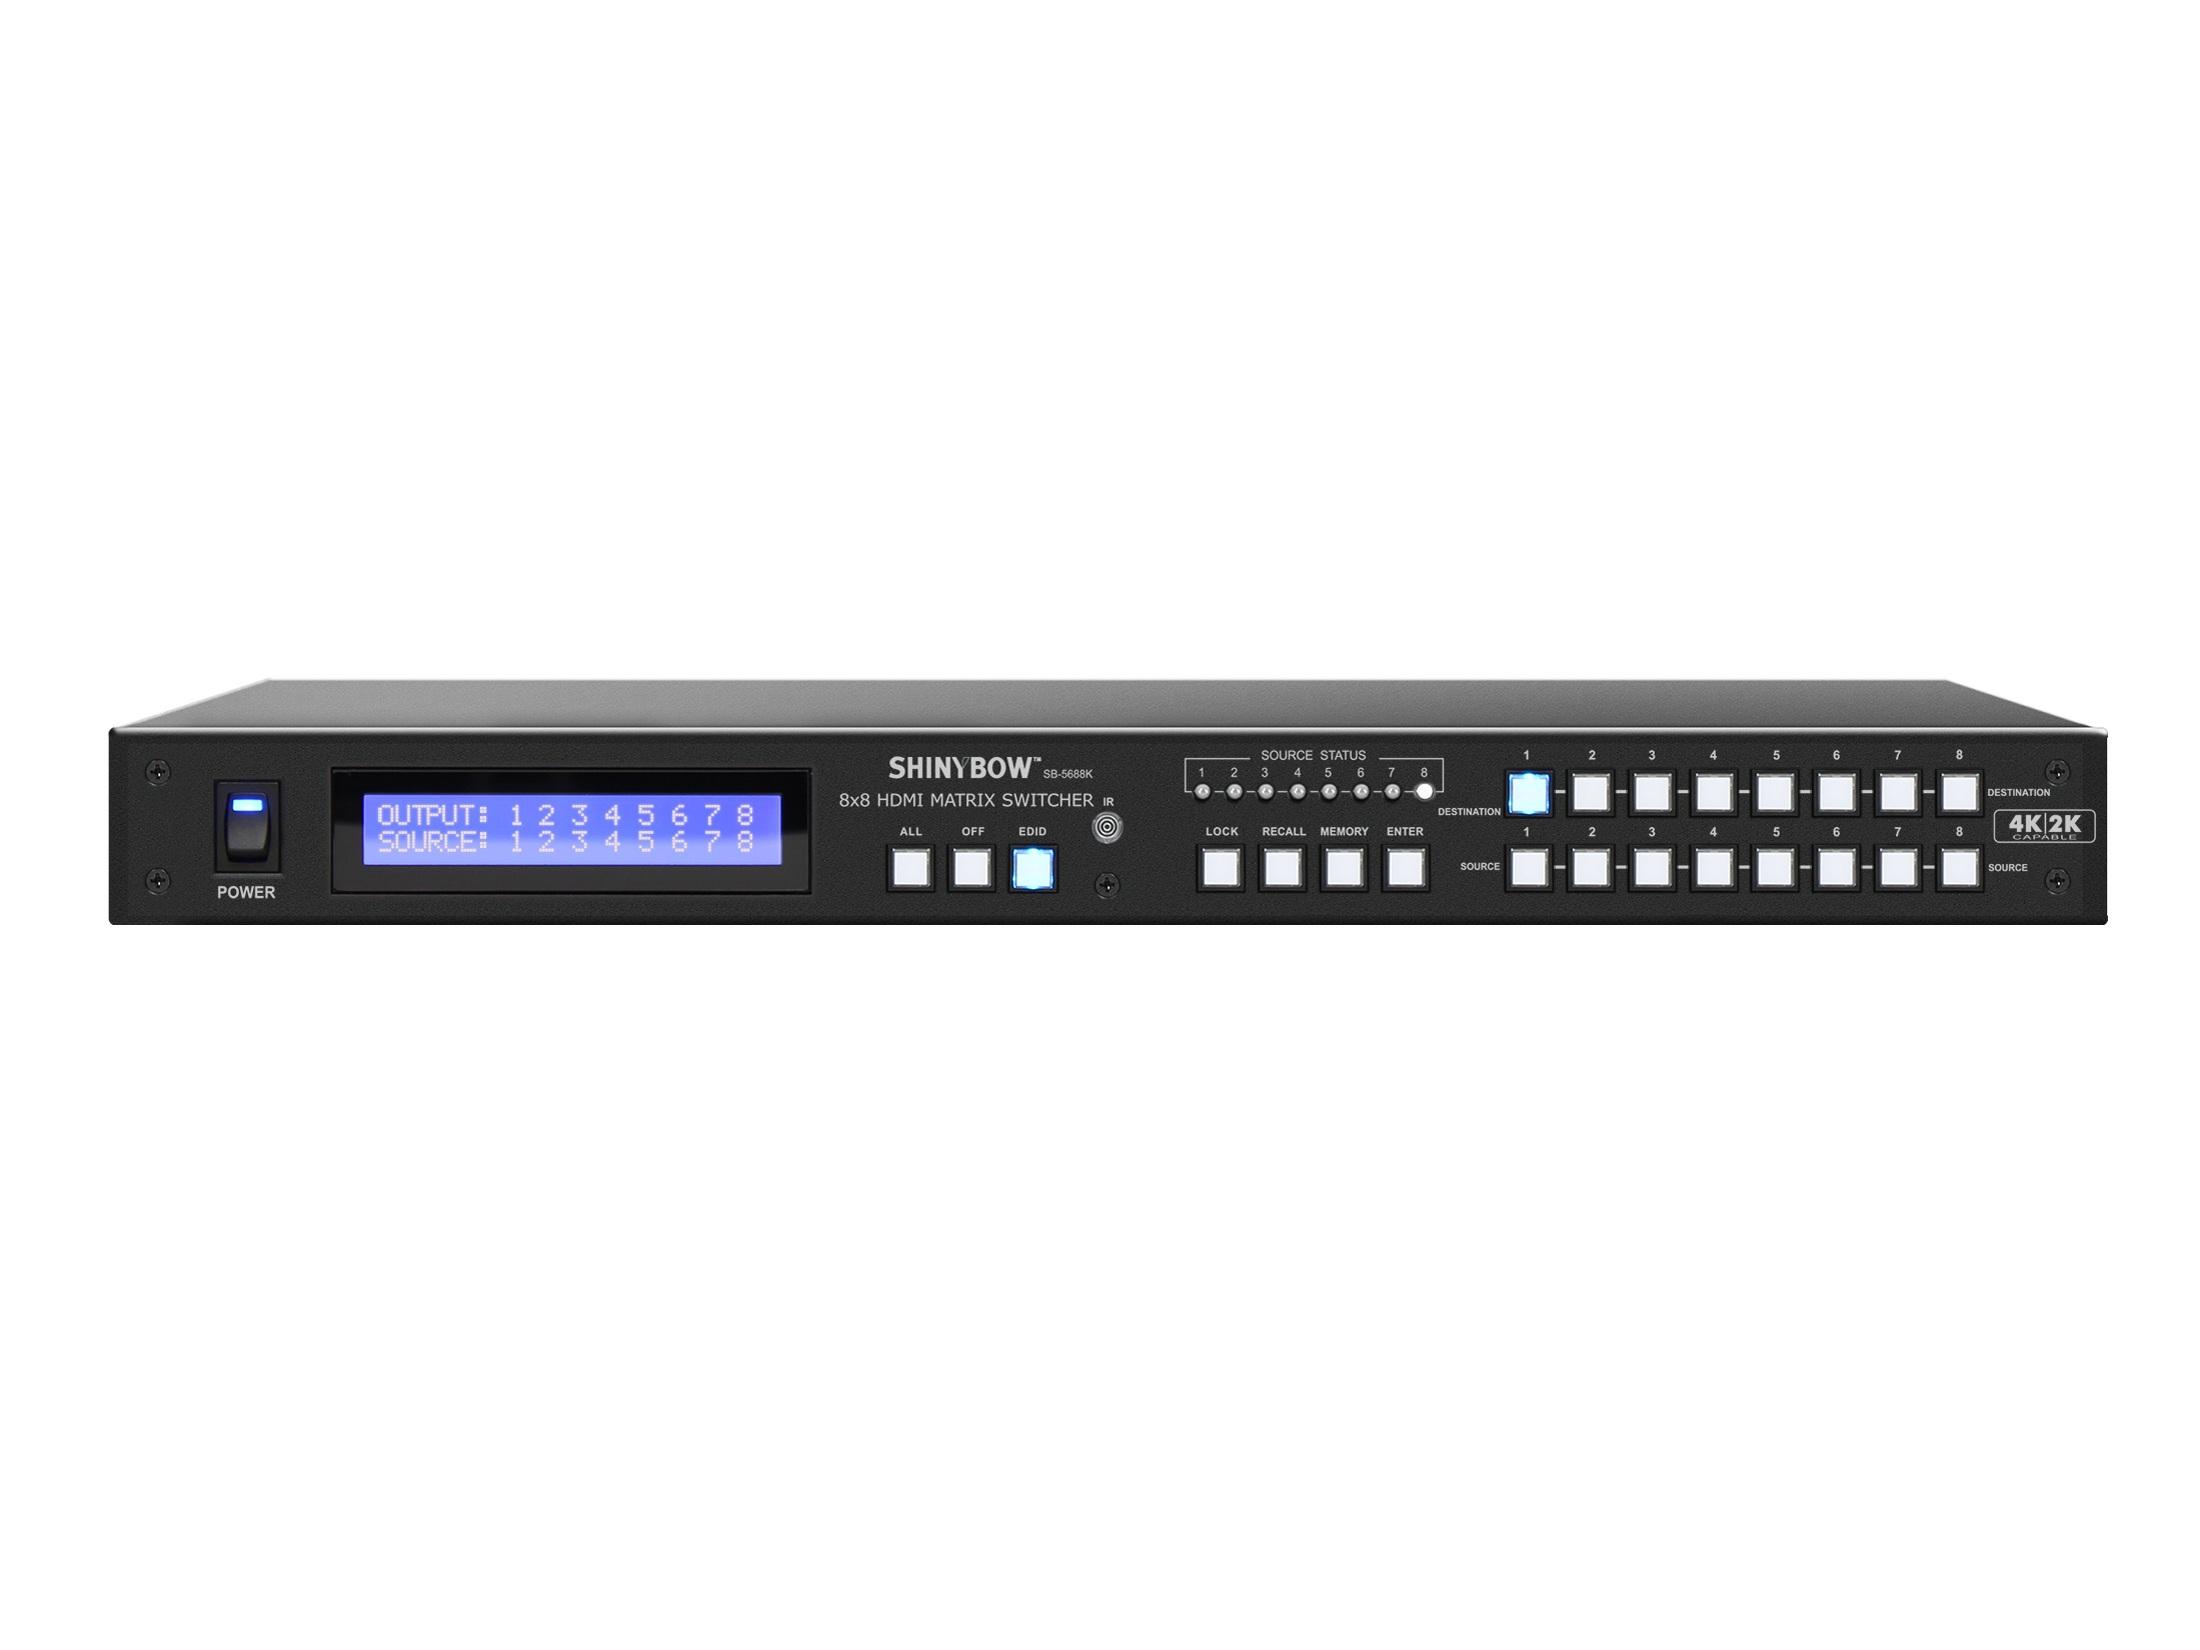 SB-5688Kp 8x8 UHD 4K2K HDMI Matrix Routing Switch w Full EDID Management/Learning/Preview Port by Shinybow